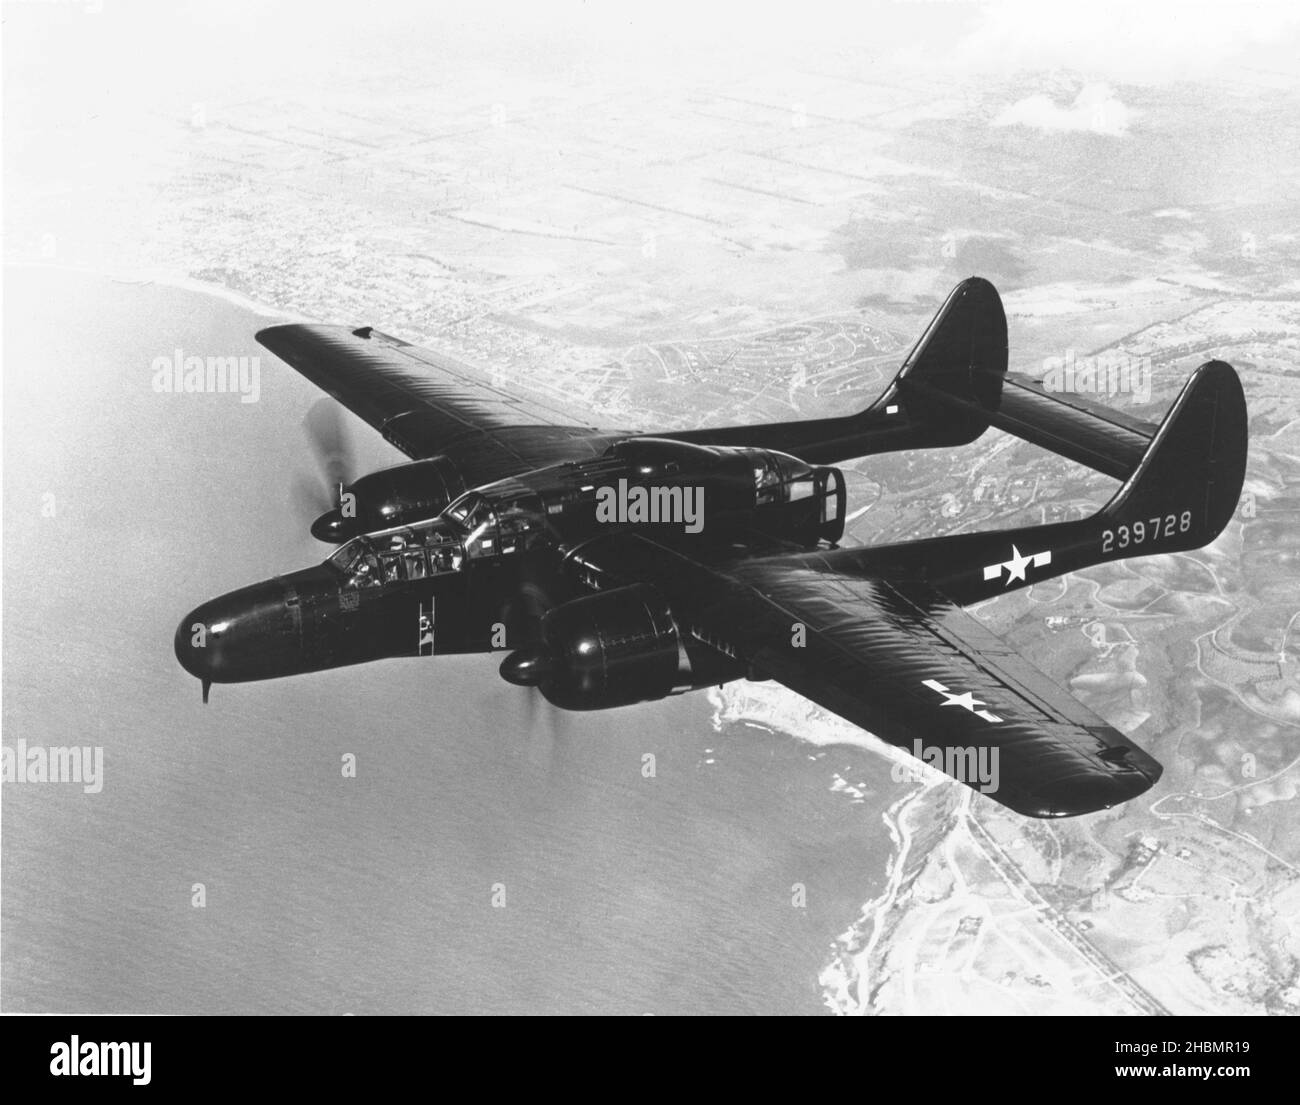 P-61 Black Widow US Military Aircraft Flys Over Land And Sea Stock Photo